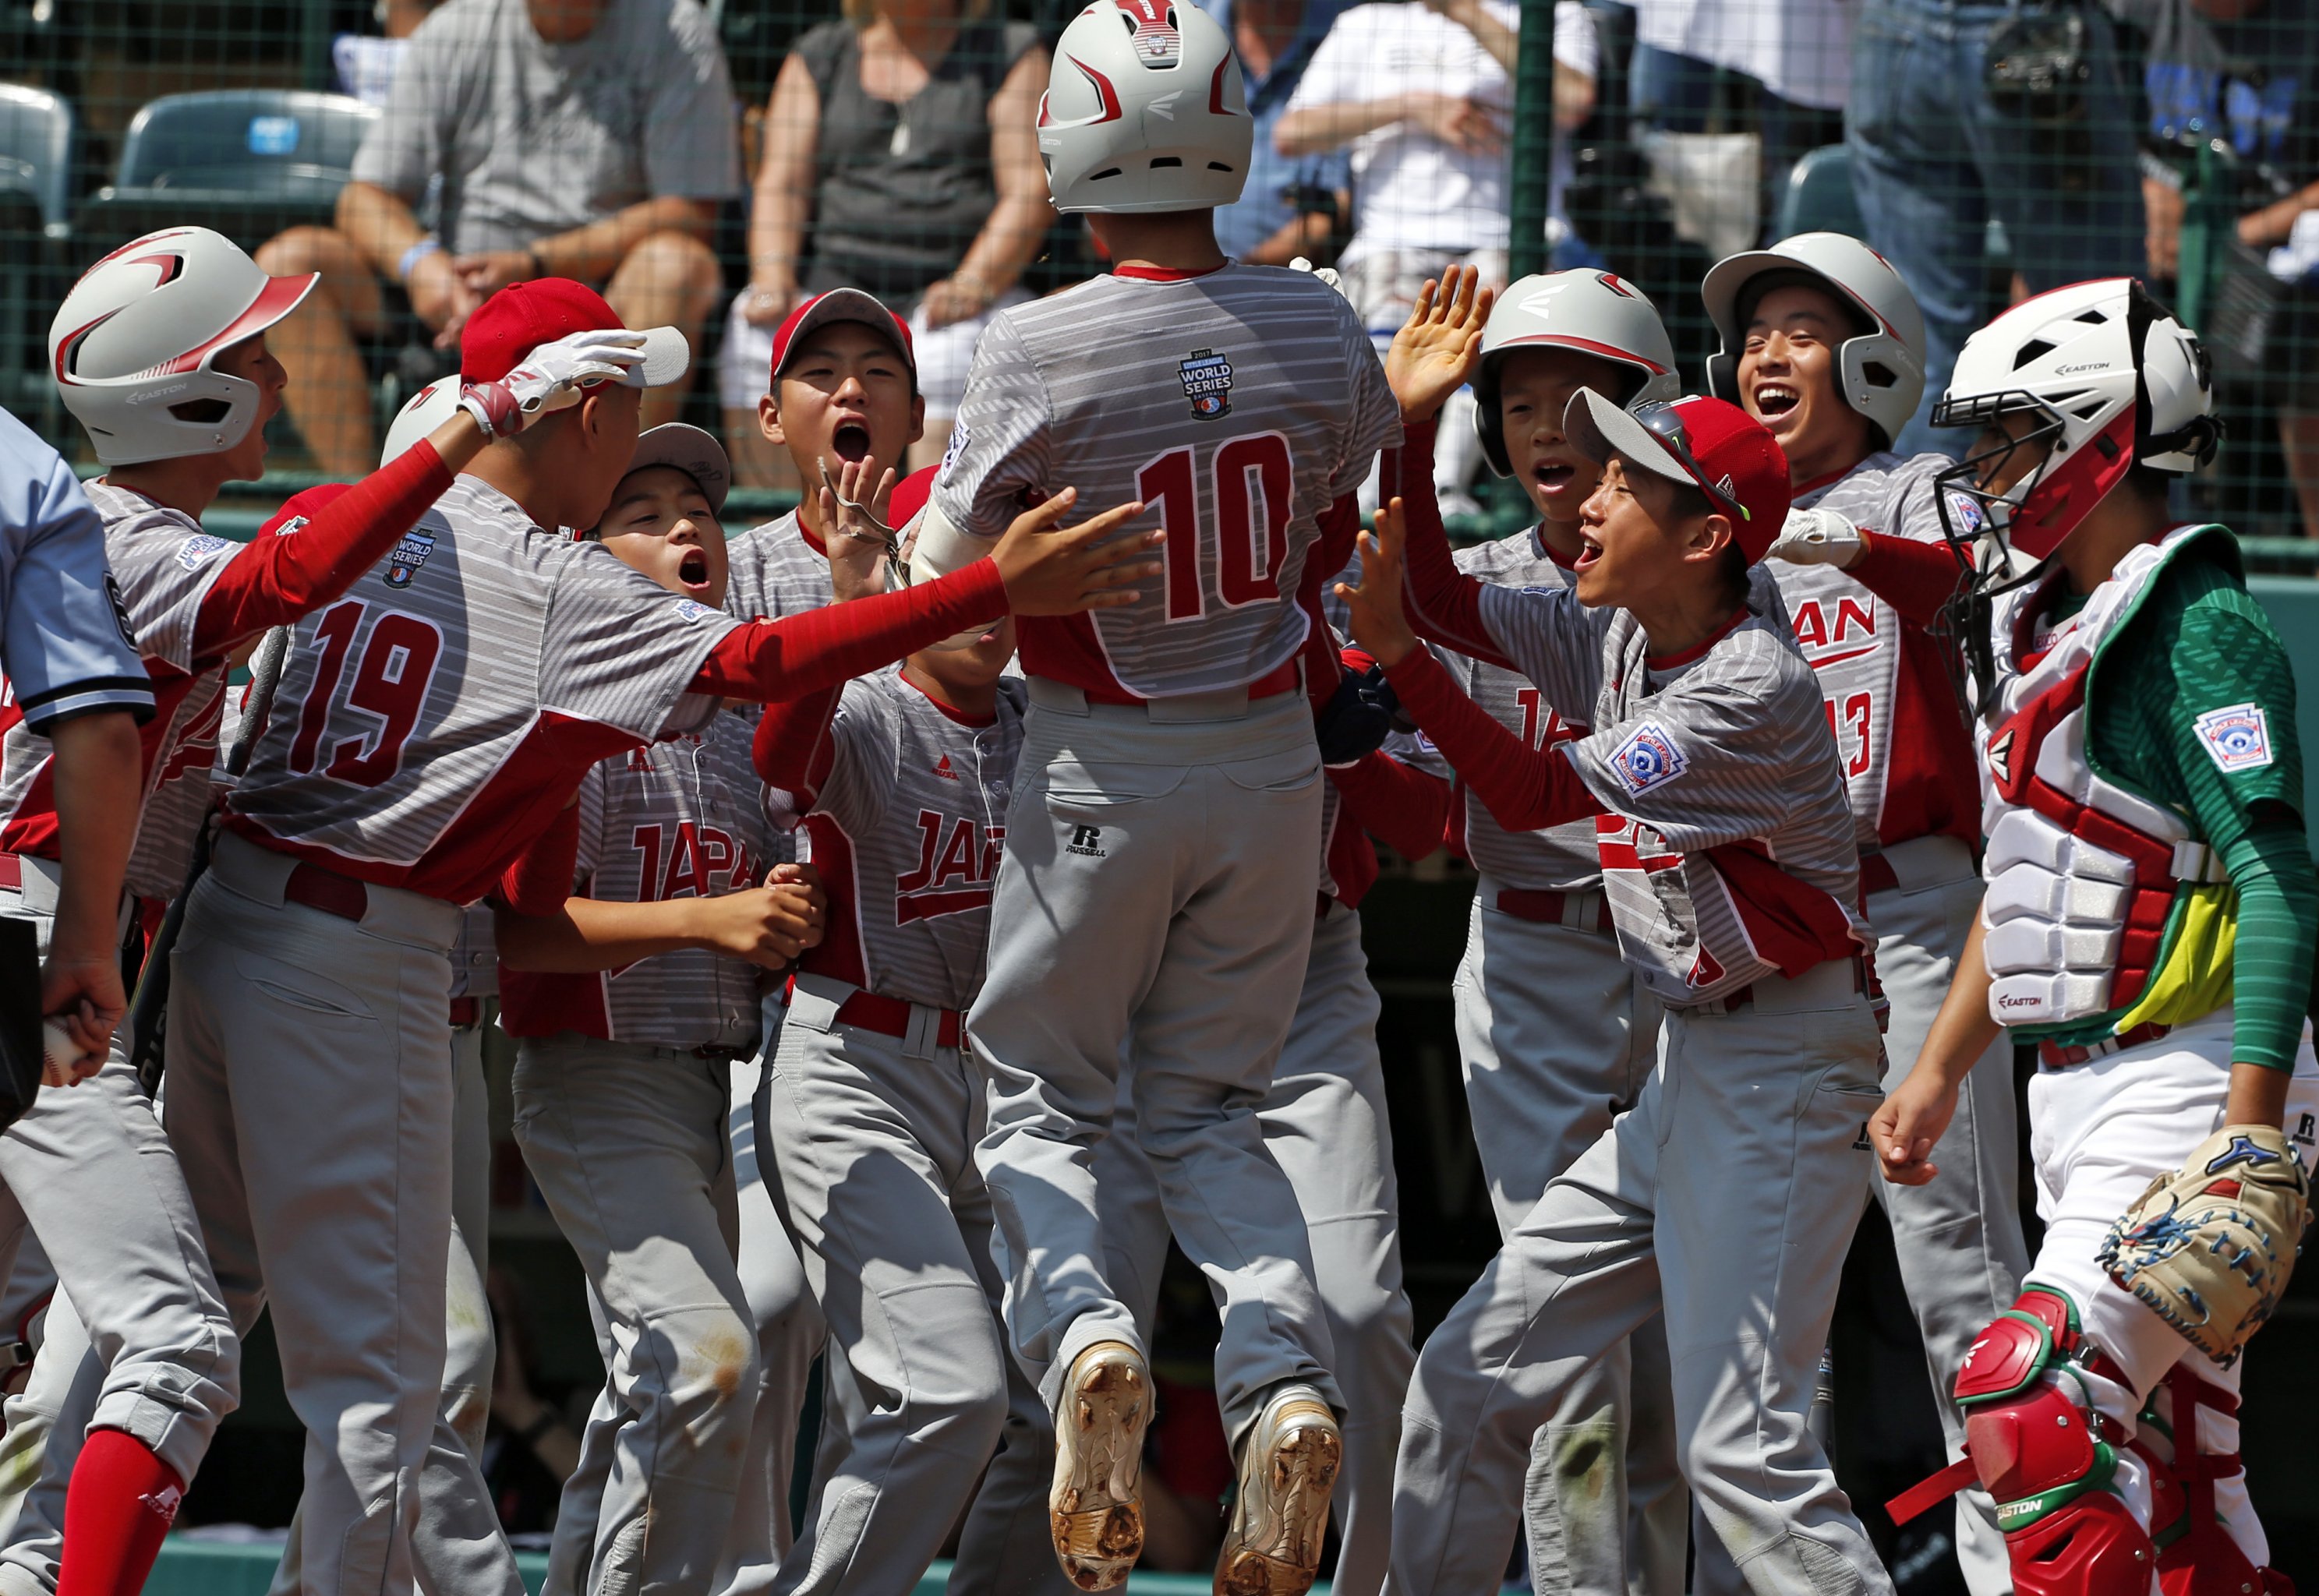 Little League - Japan is heading to the International Championship! #LLWS